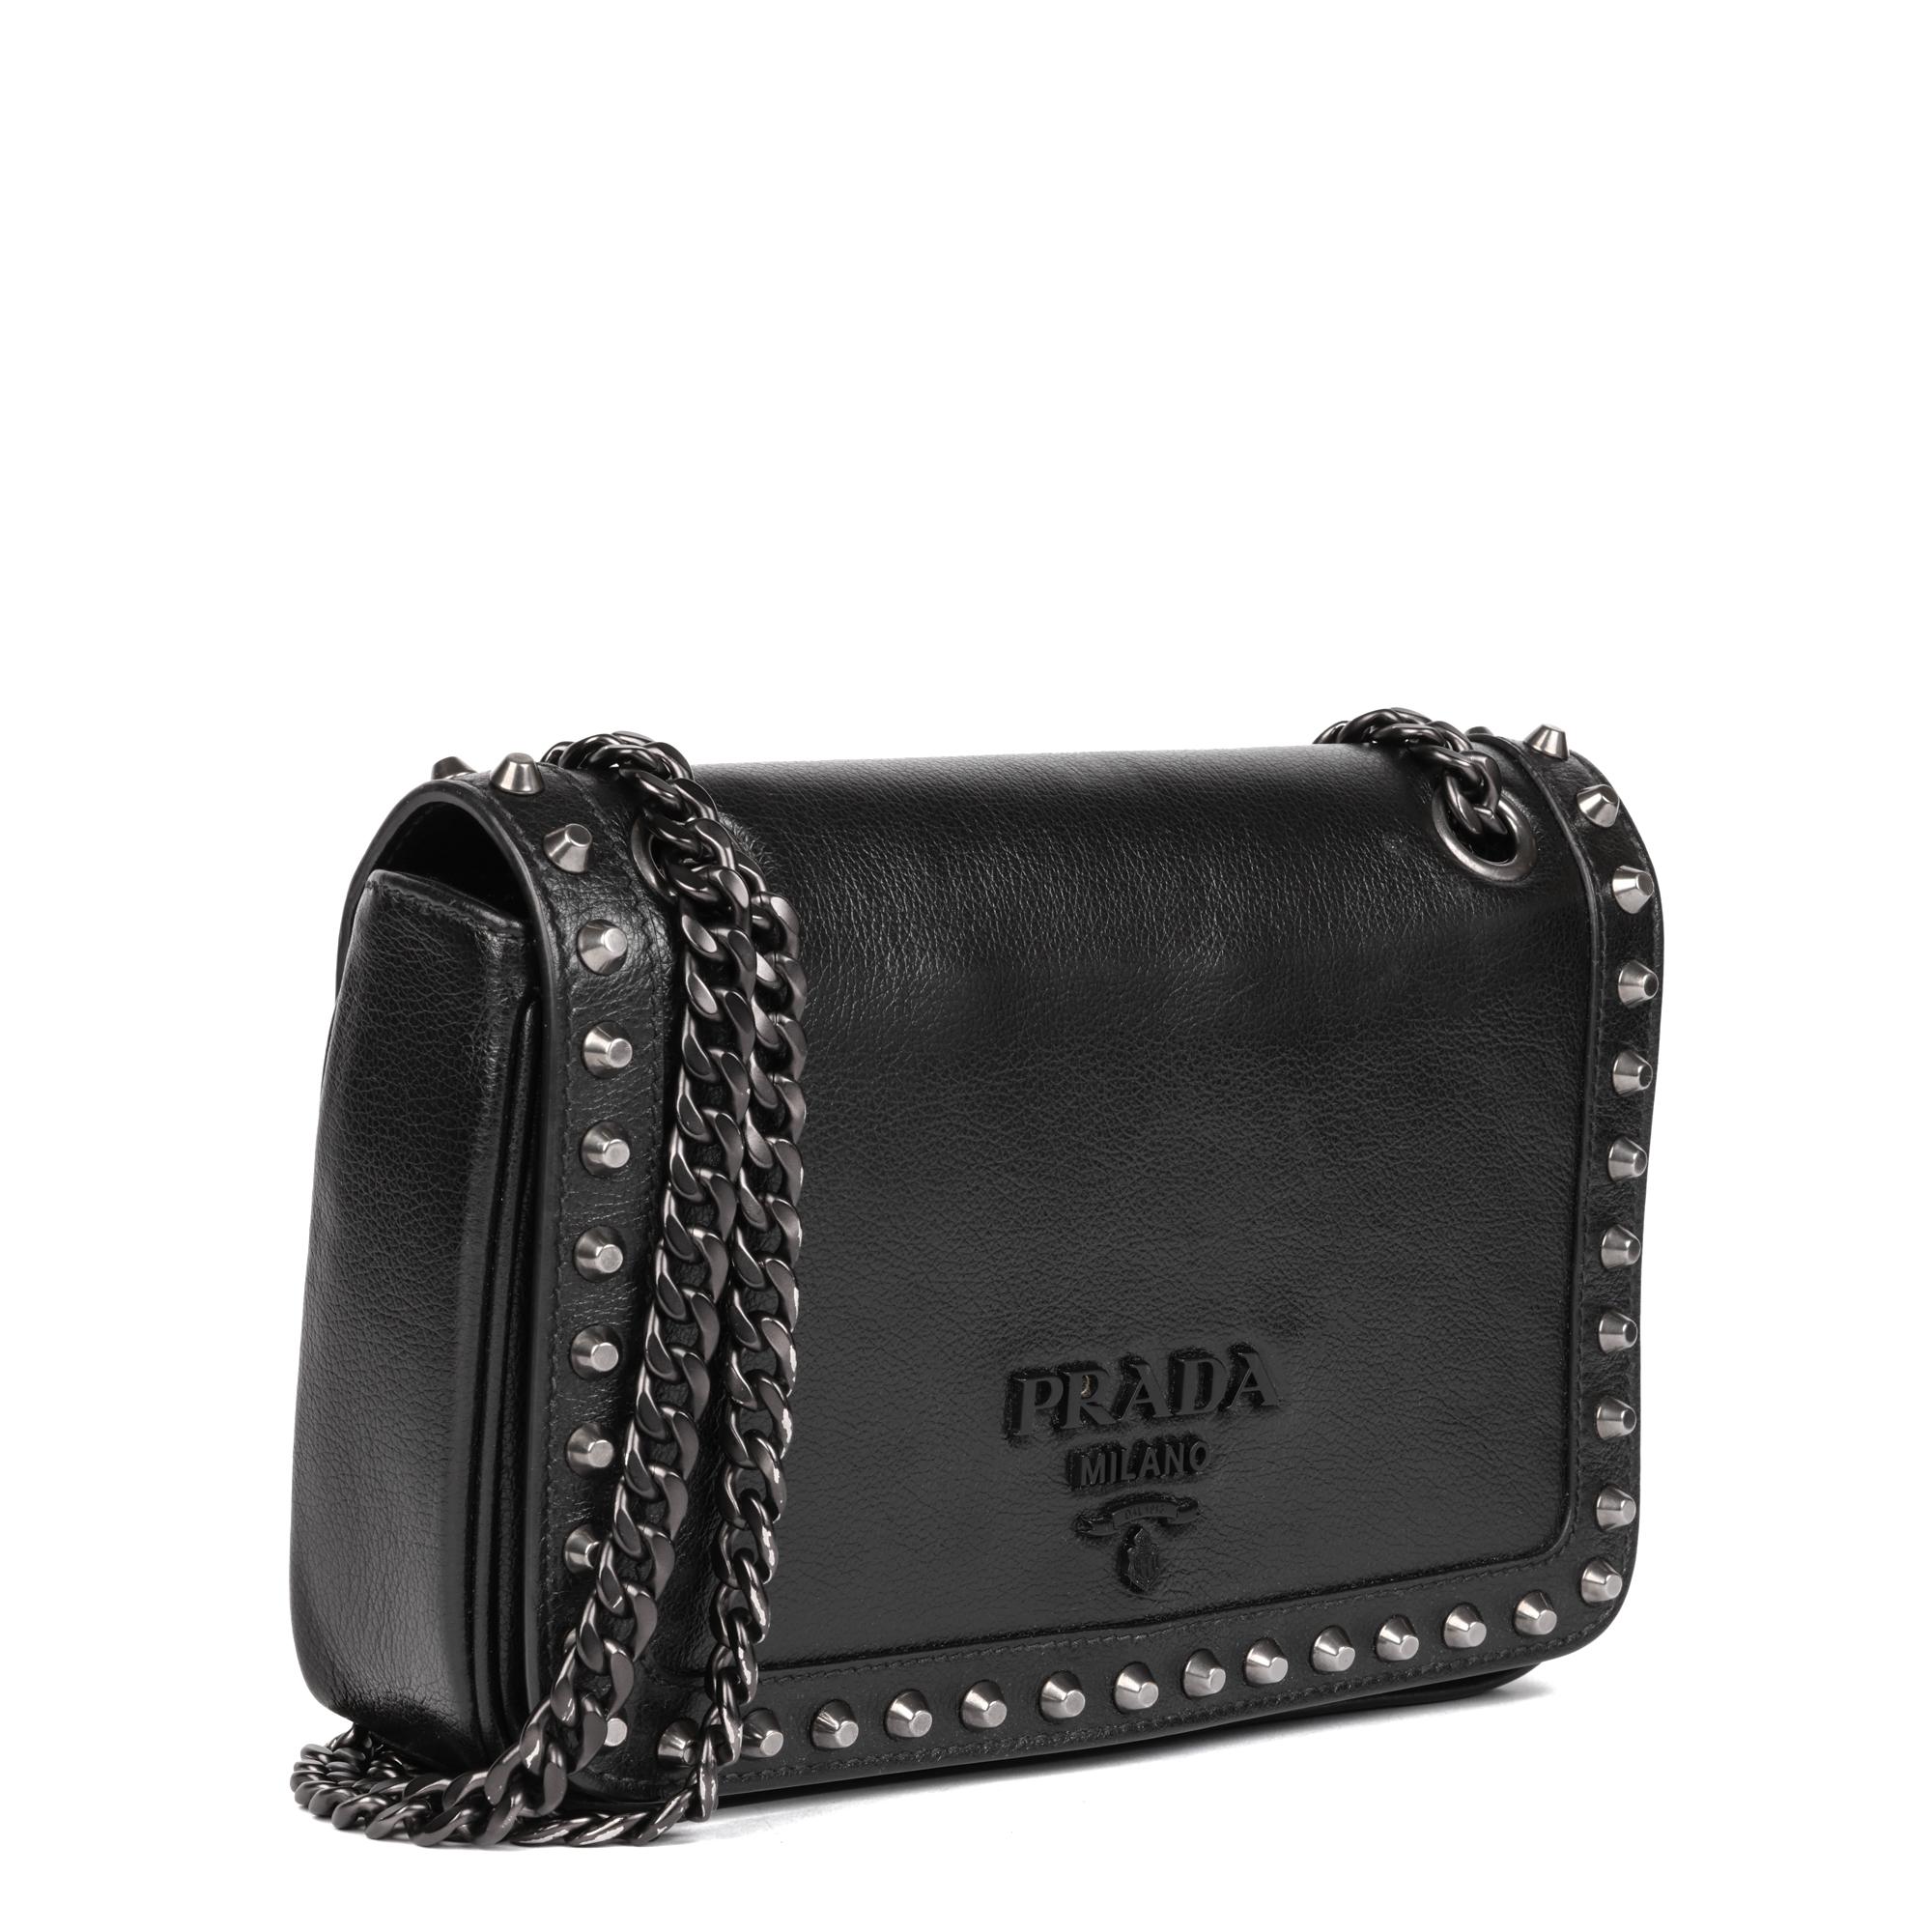 PRADA
Black Calfskin Leather Studded Crossbody Bag

Serial Number: 59
Age (Circa): 2010
Authenticity Details: Serial Tag (Made in Italy) 
Gender: Ladies
Type: Shoulder, Crossbody

Colour: Black
Hardware: Silver
Material(s): Calfskin